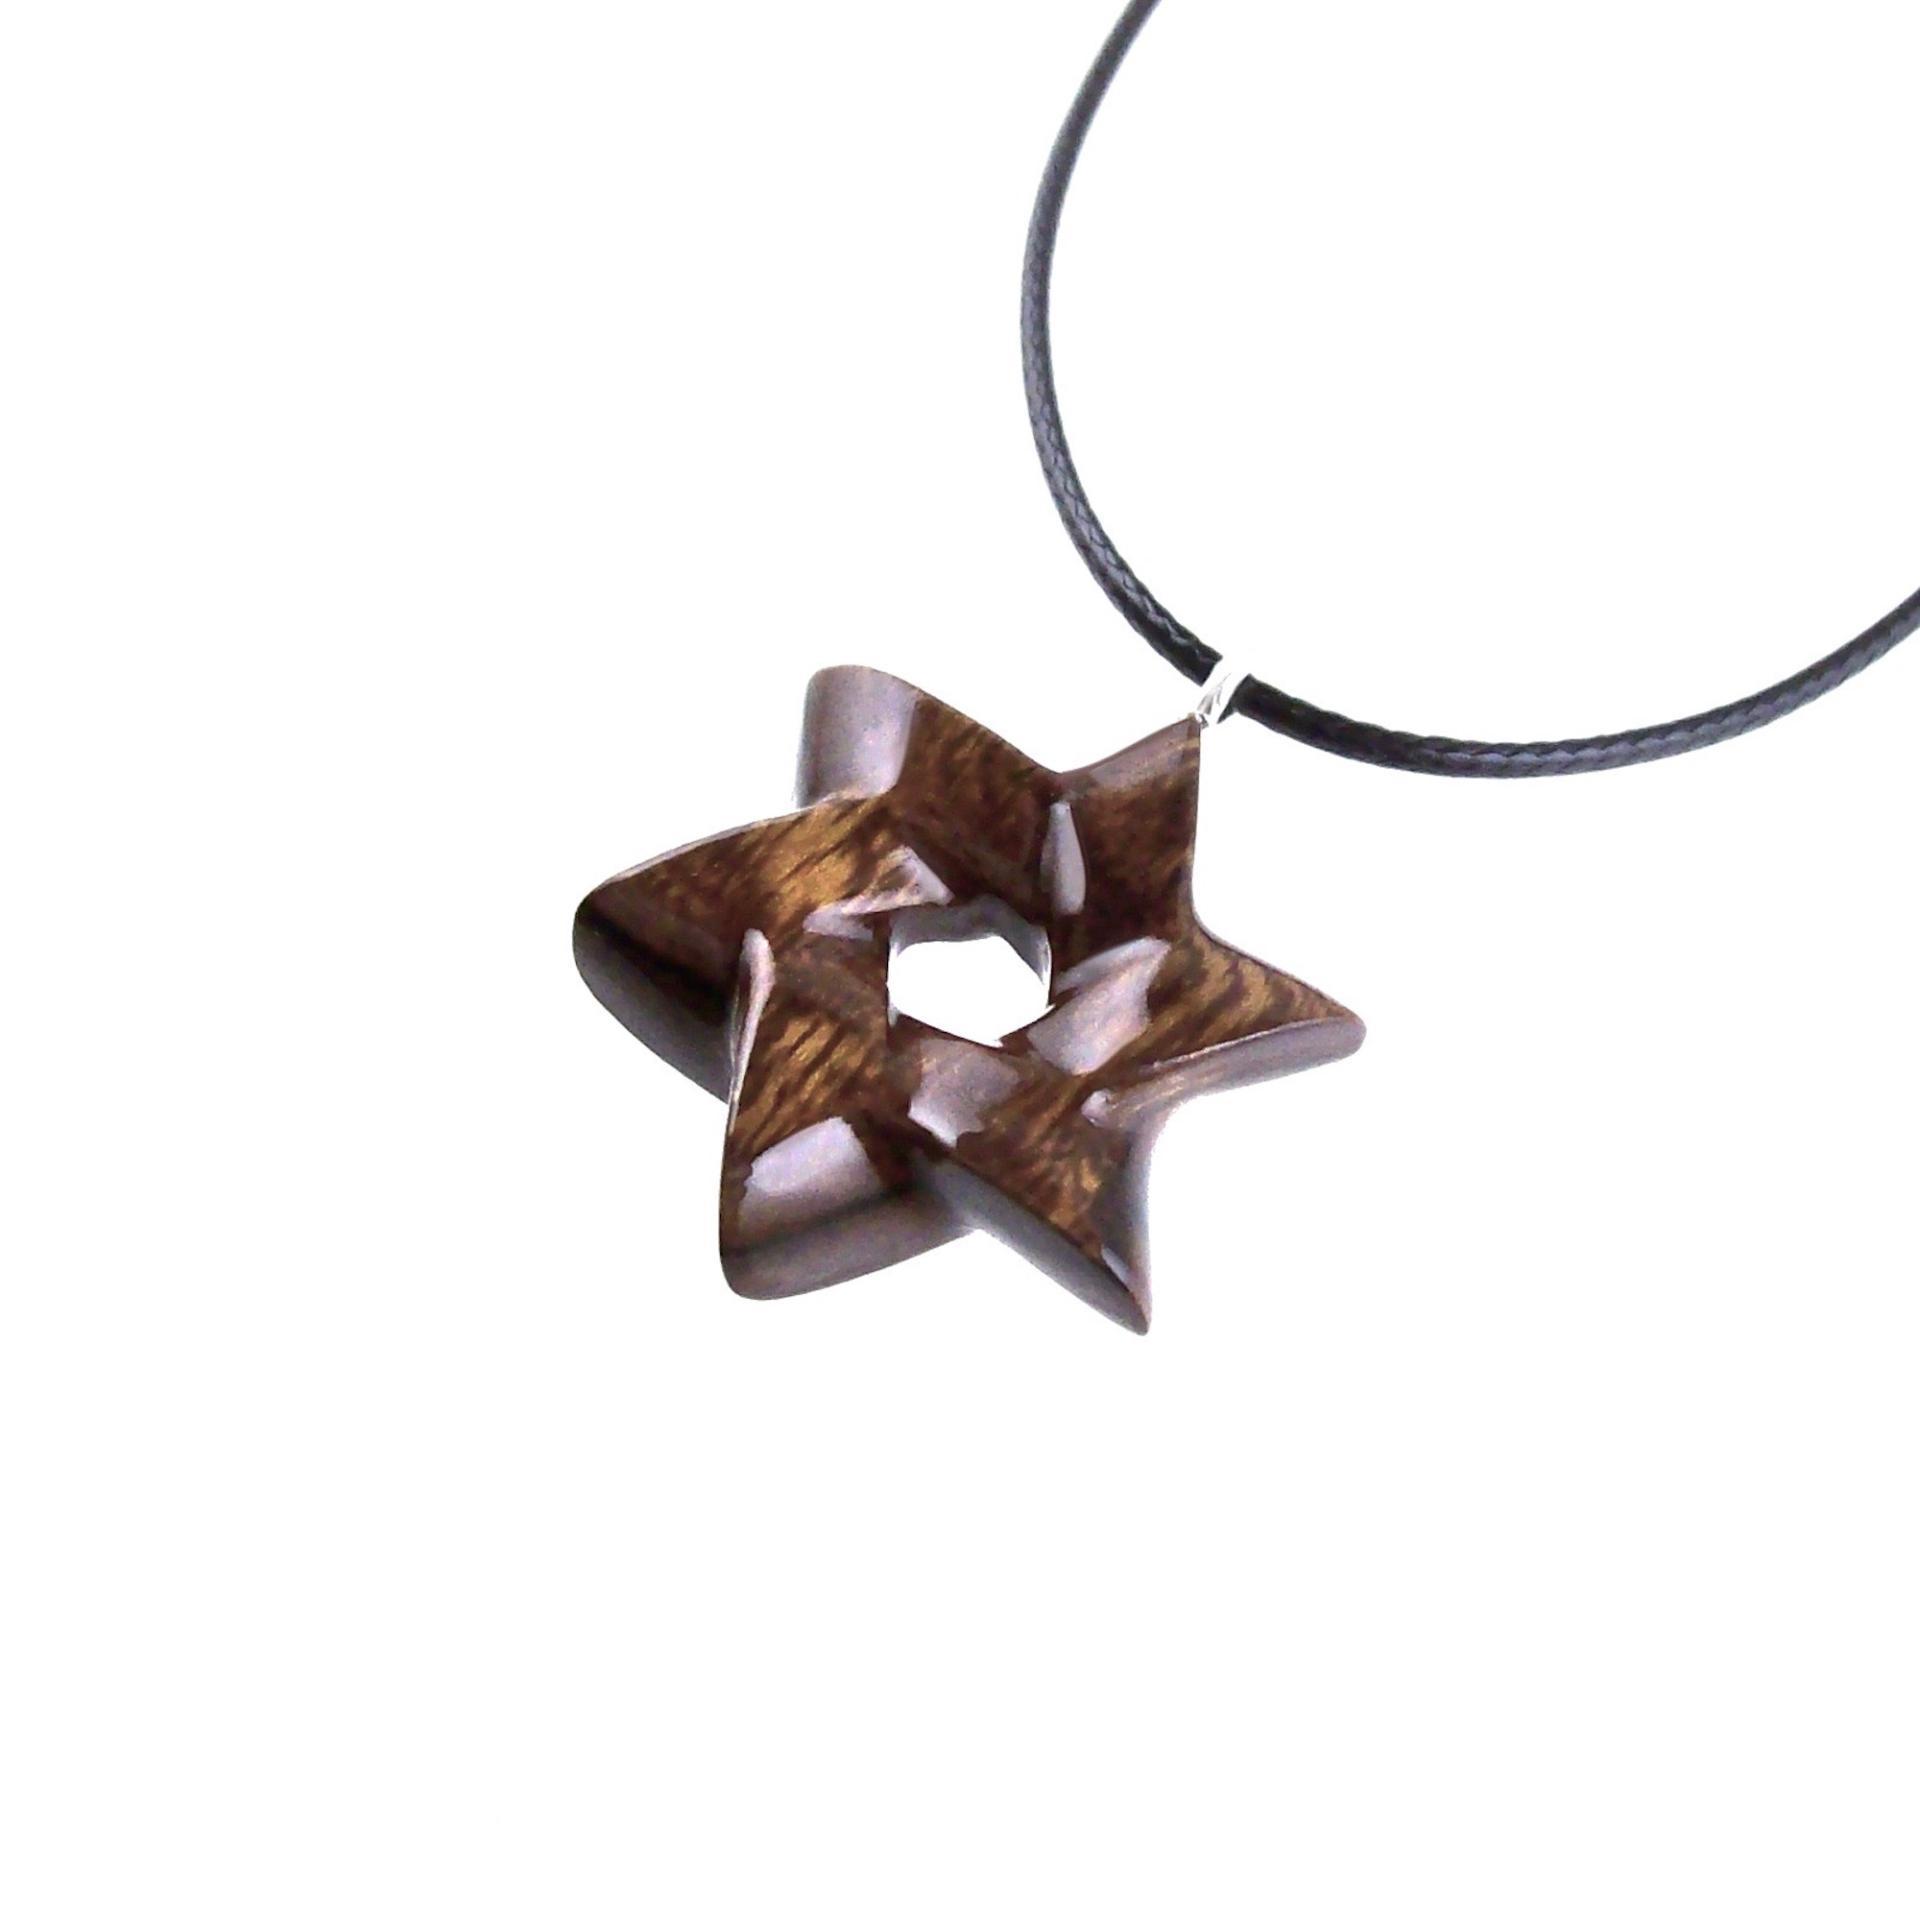 Wooden Star of David Pendant, Hand Carved Jewish Star Necklace, Wood Jewelry for Men or Women, One of a Kind Gift